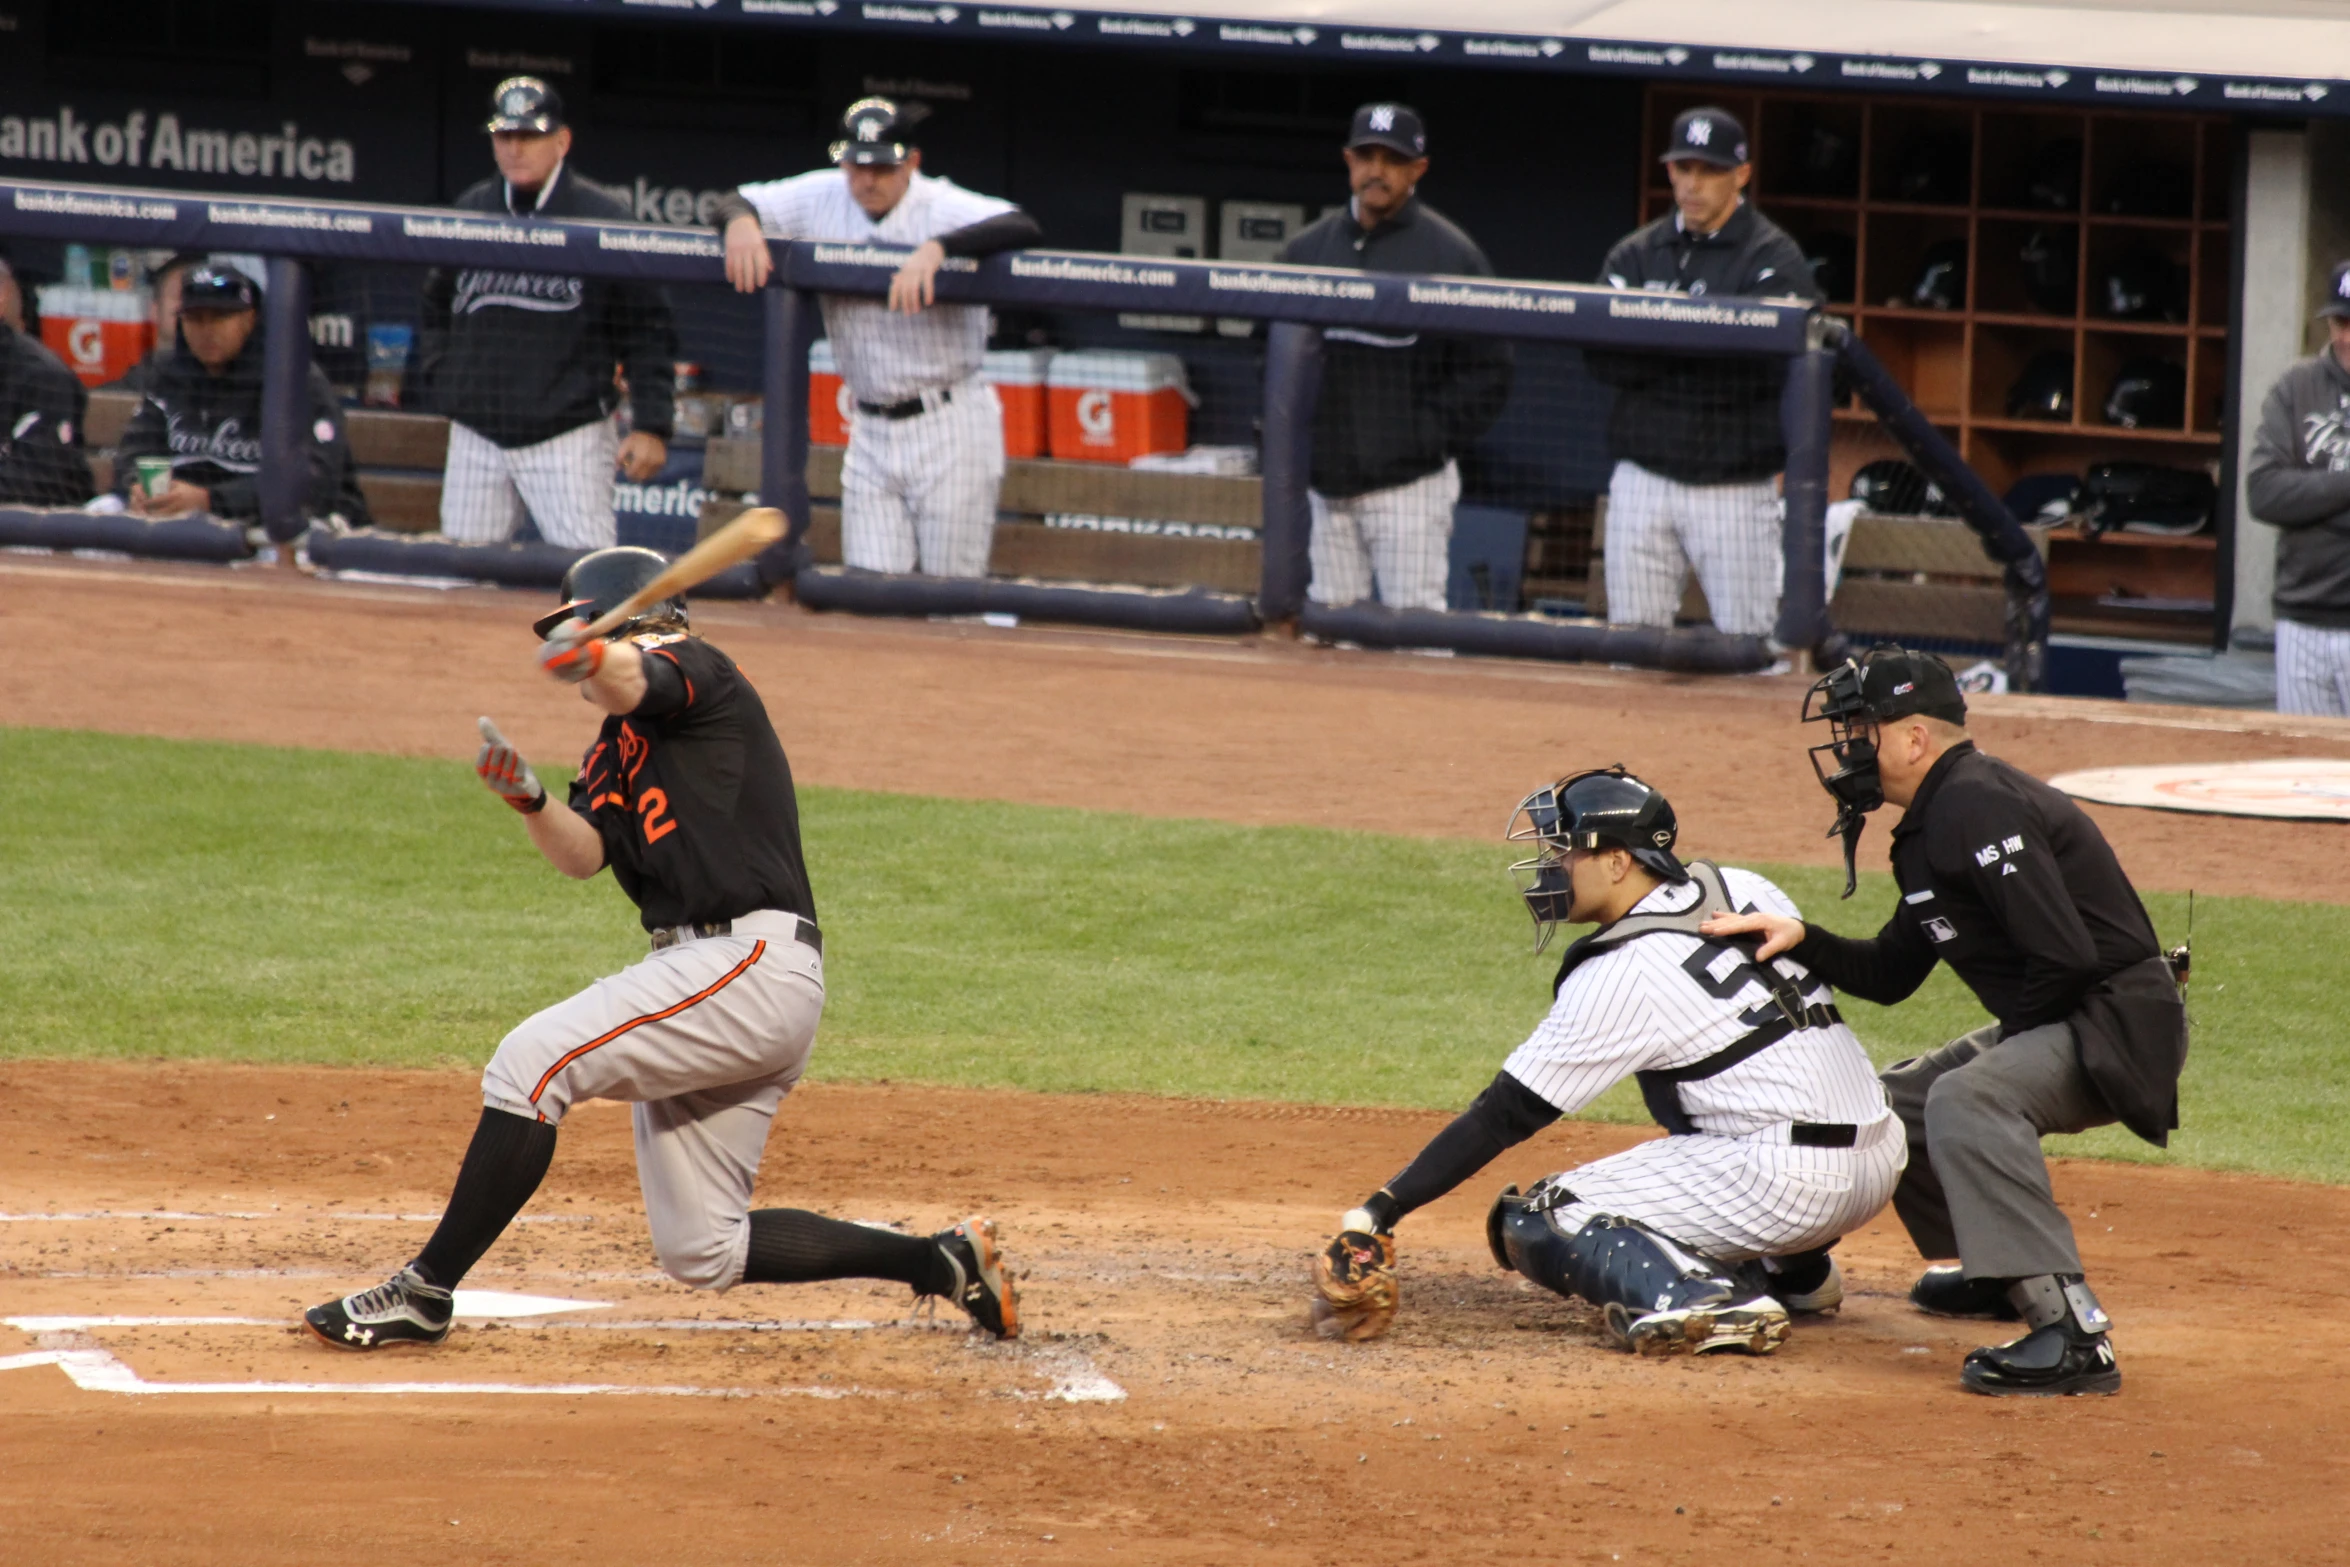 a baseball player taking a swing at a ball